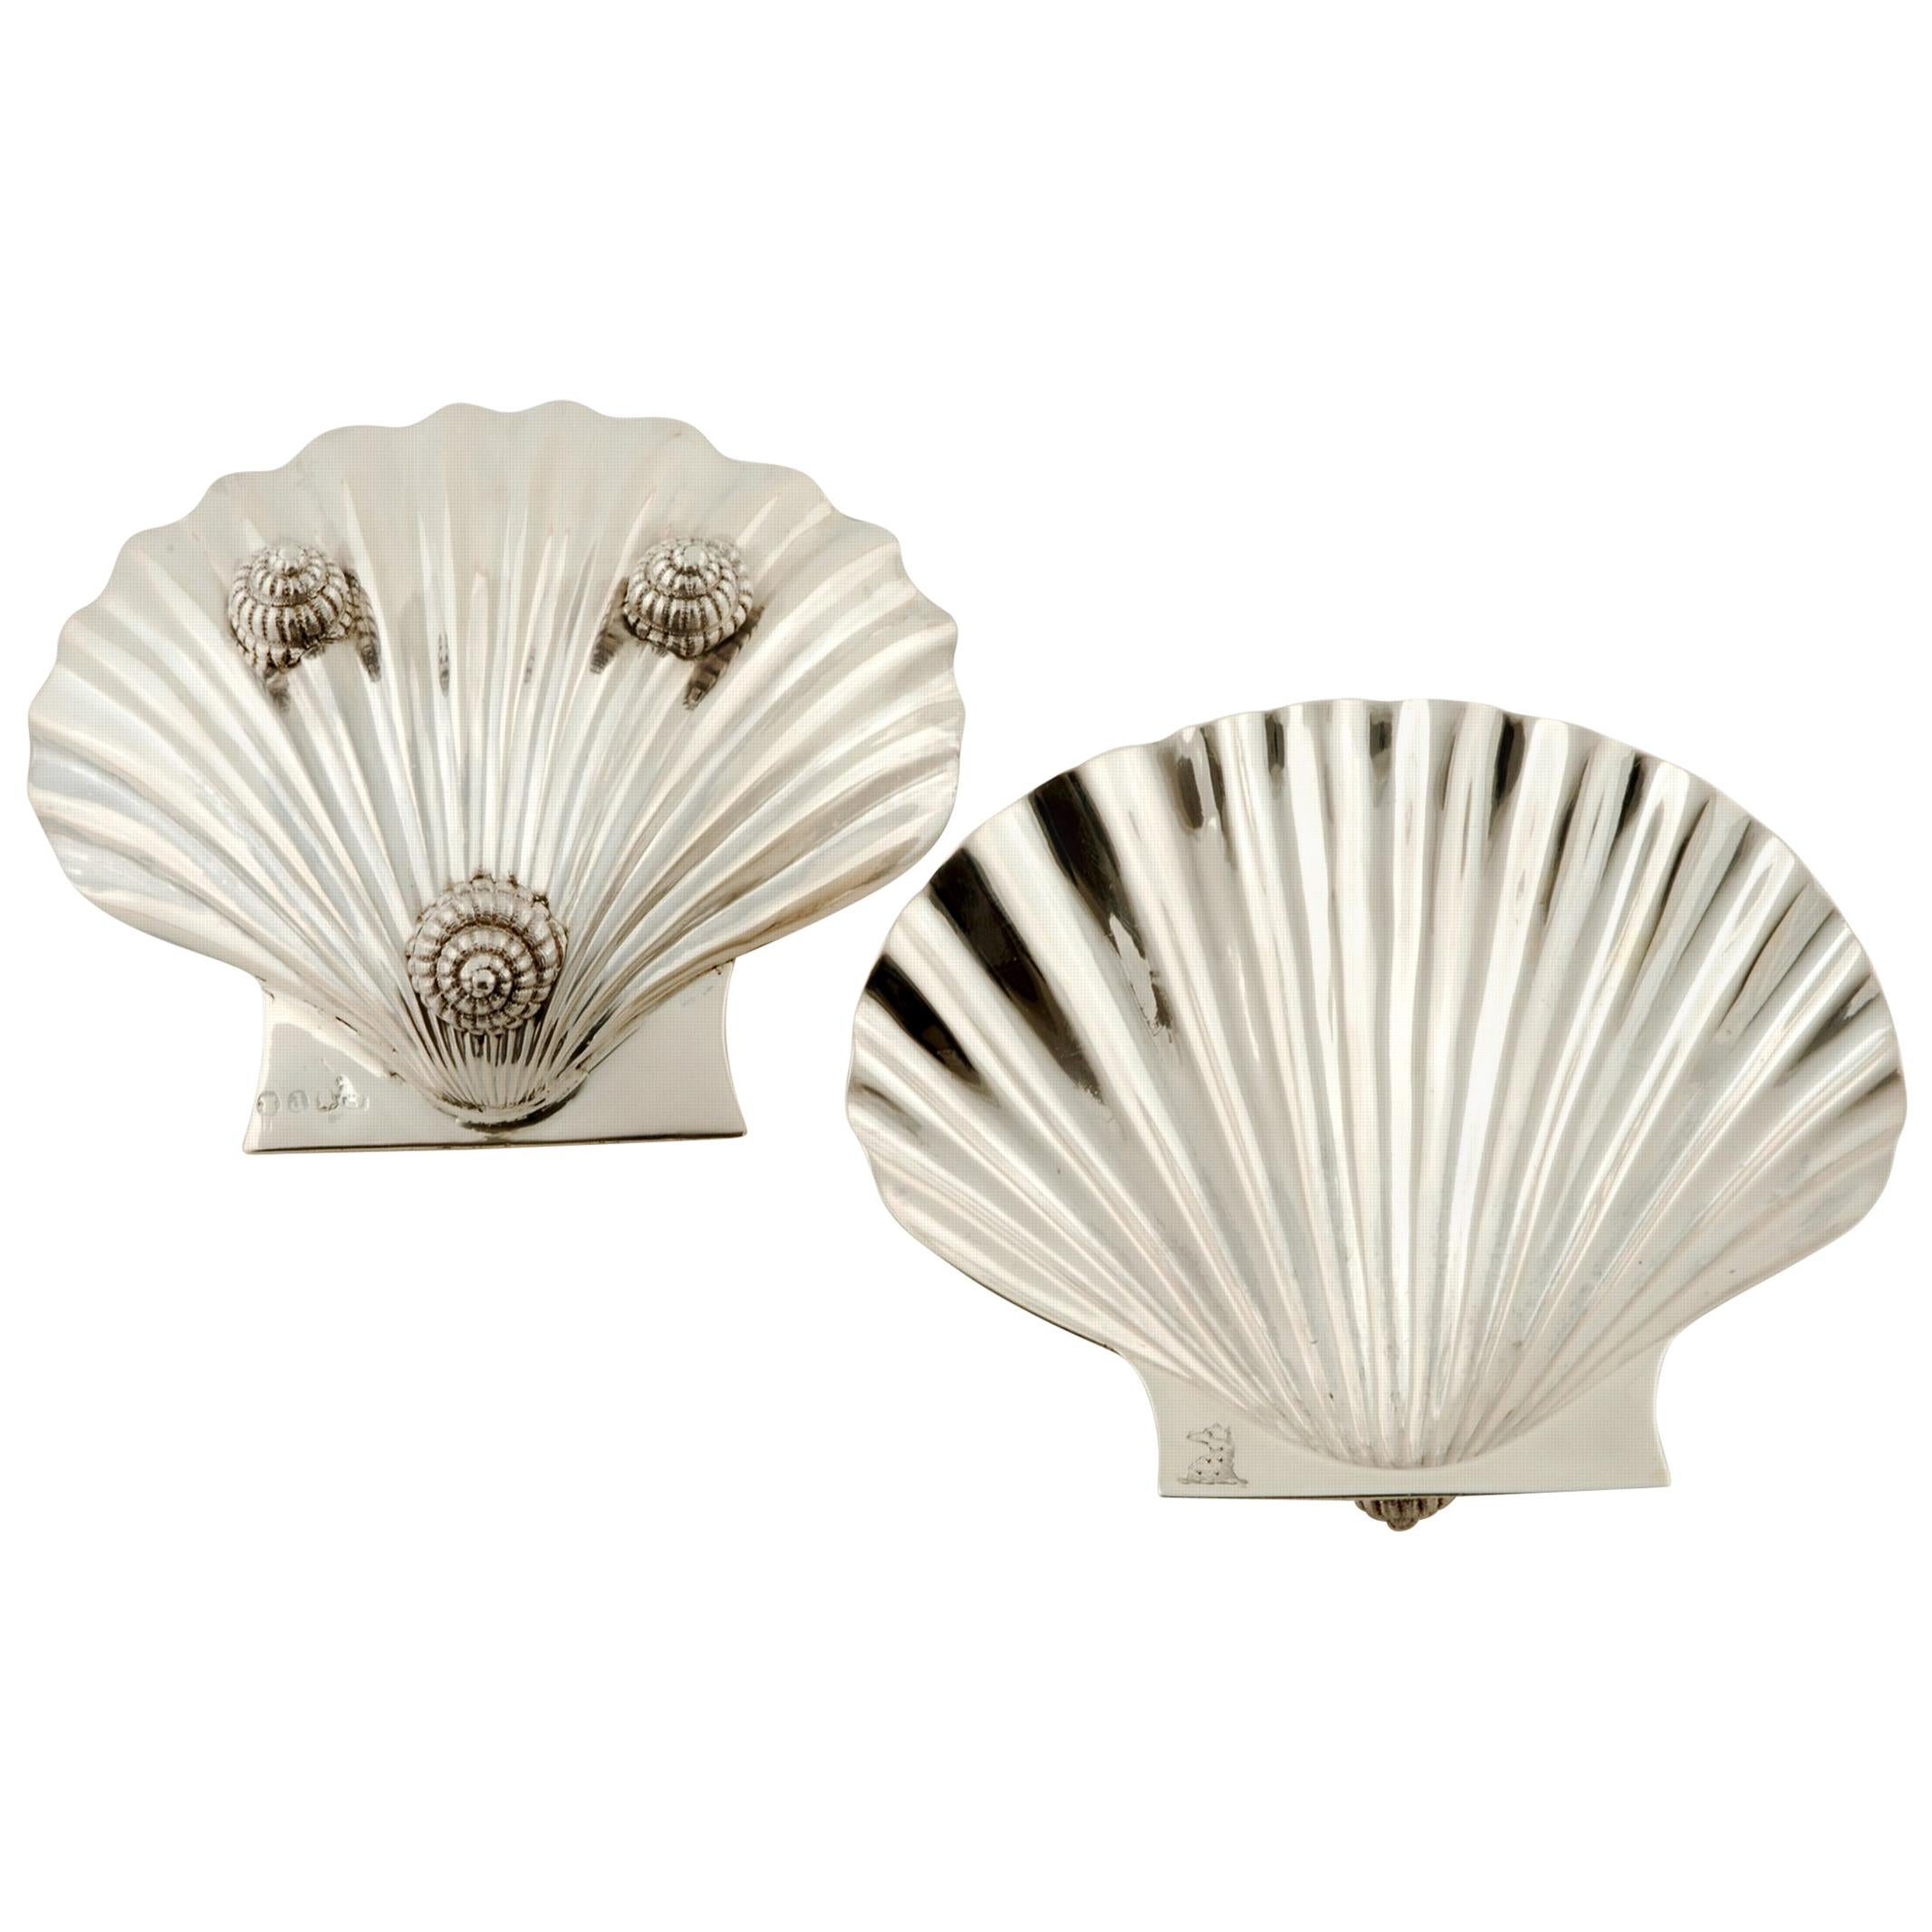 Rare Pair of Crested Scallop-Shaped Chinese Export Silver Butter Dishes For Sale